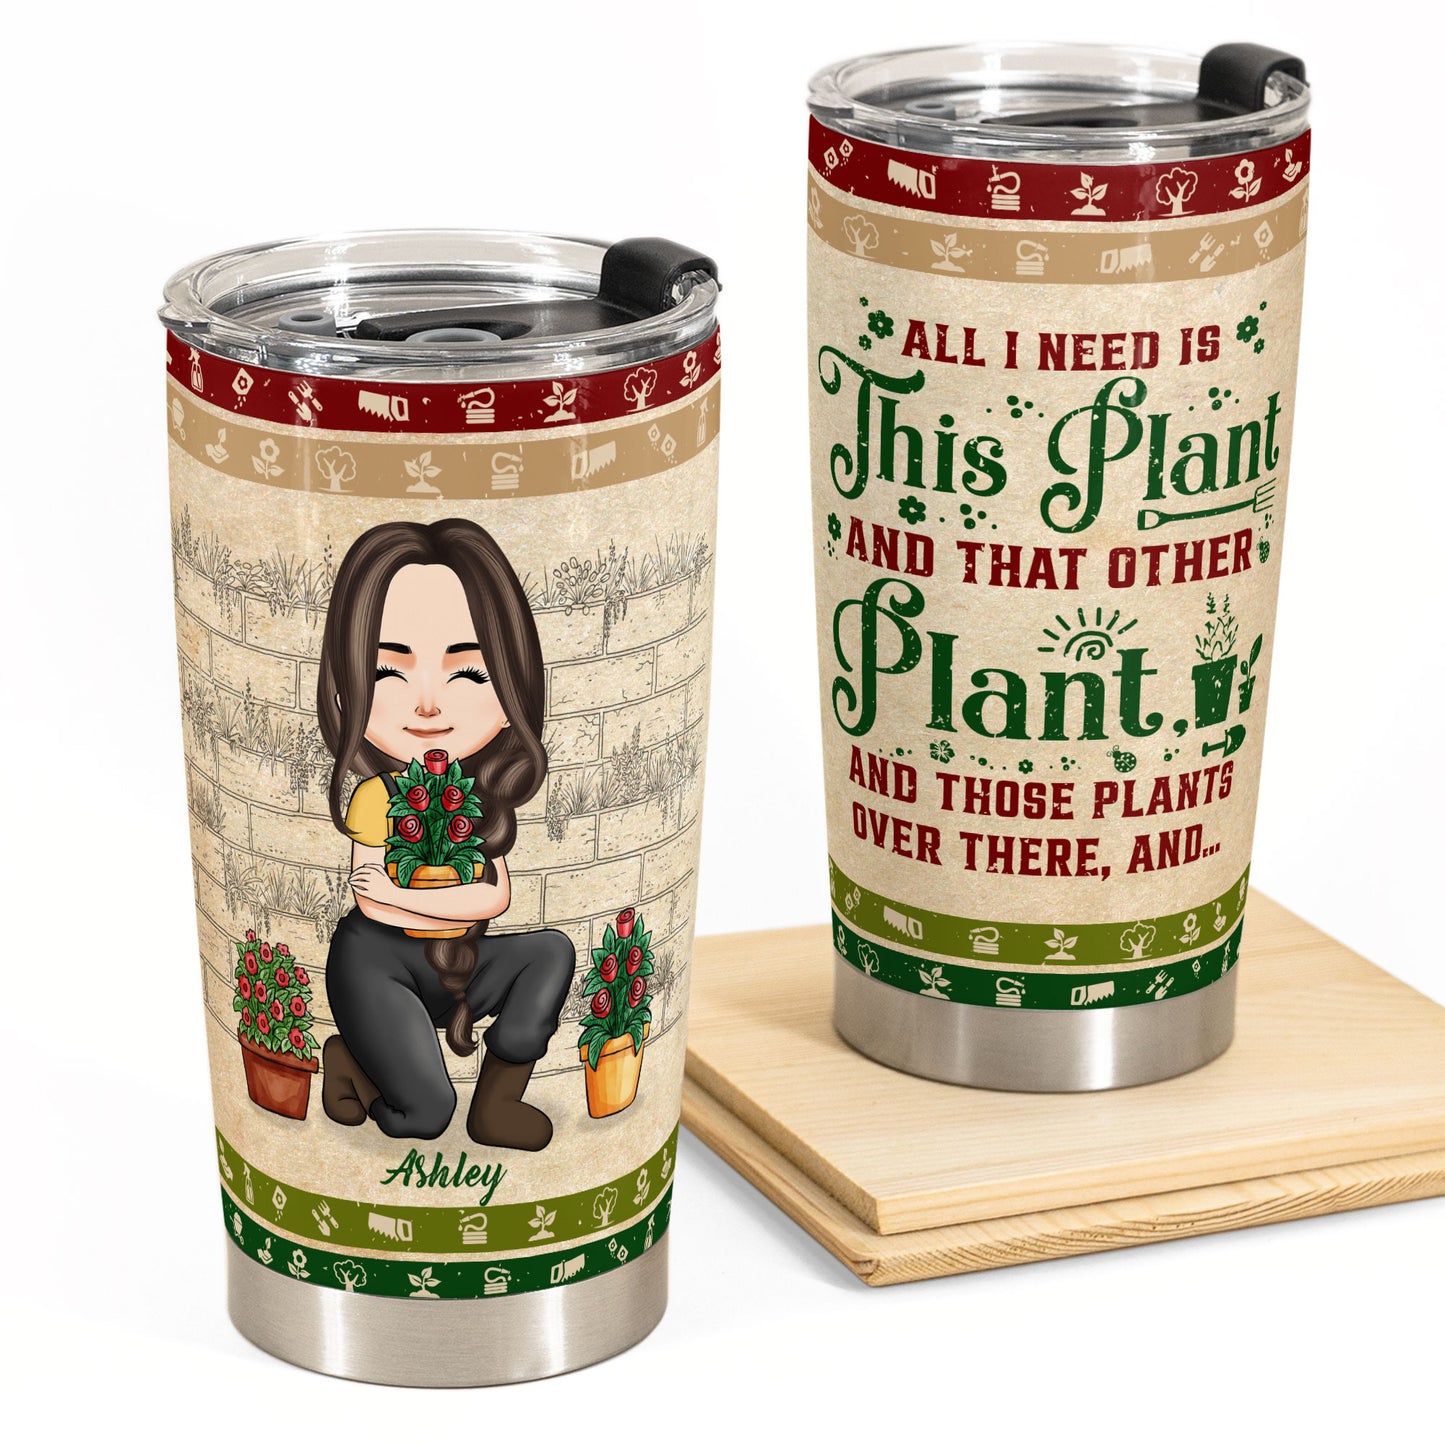 All I Need Is This Plant And That Other Plant - Personalized Tumbler Cup - Birthday, New Home, Funny Gift For Gardeners, Home Garden Lovers, Plant Ladies